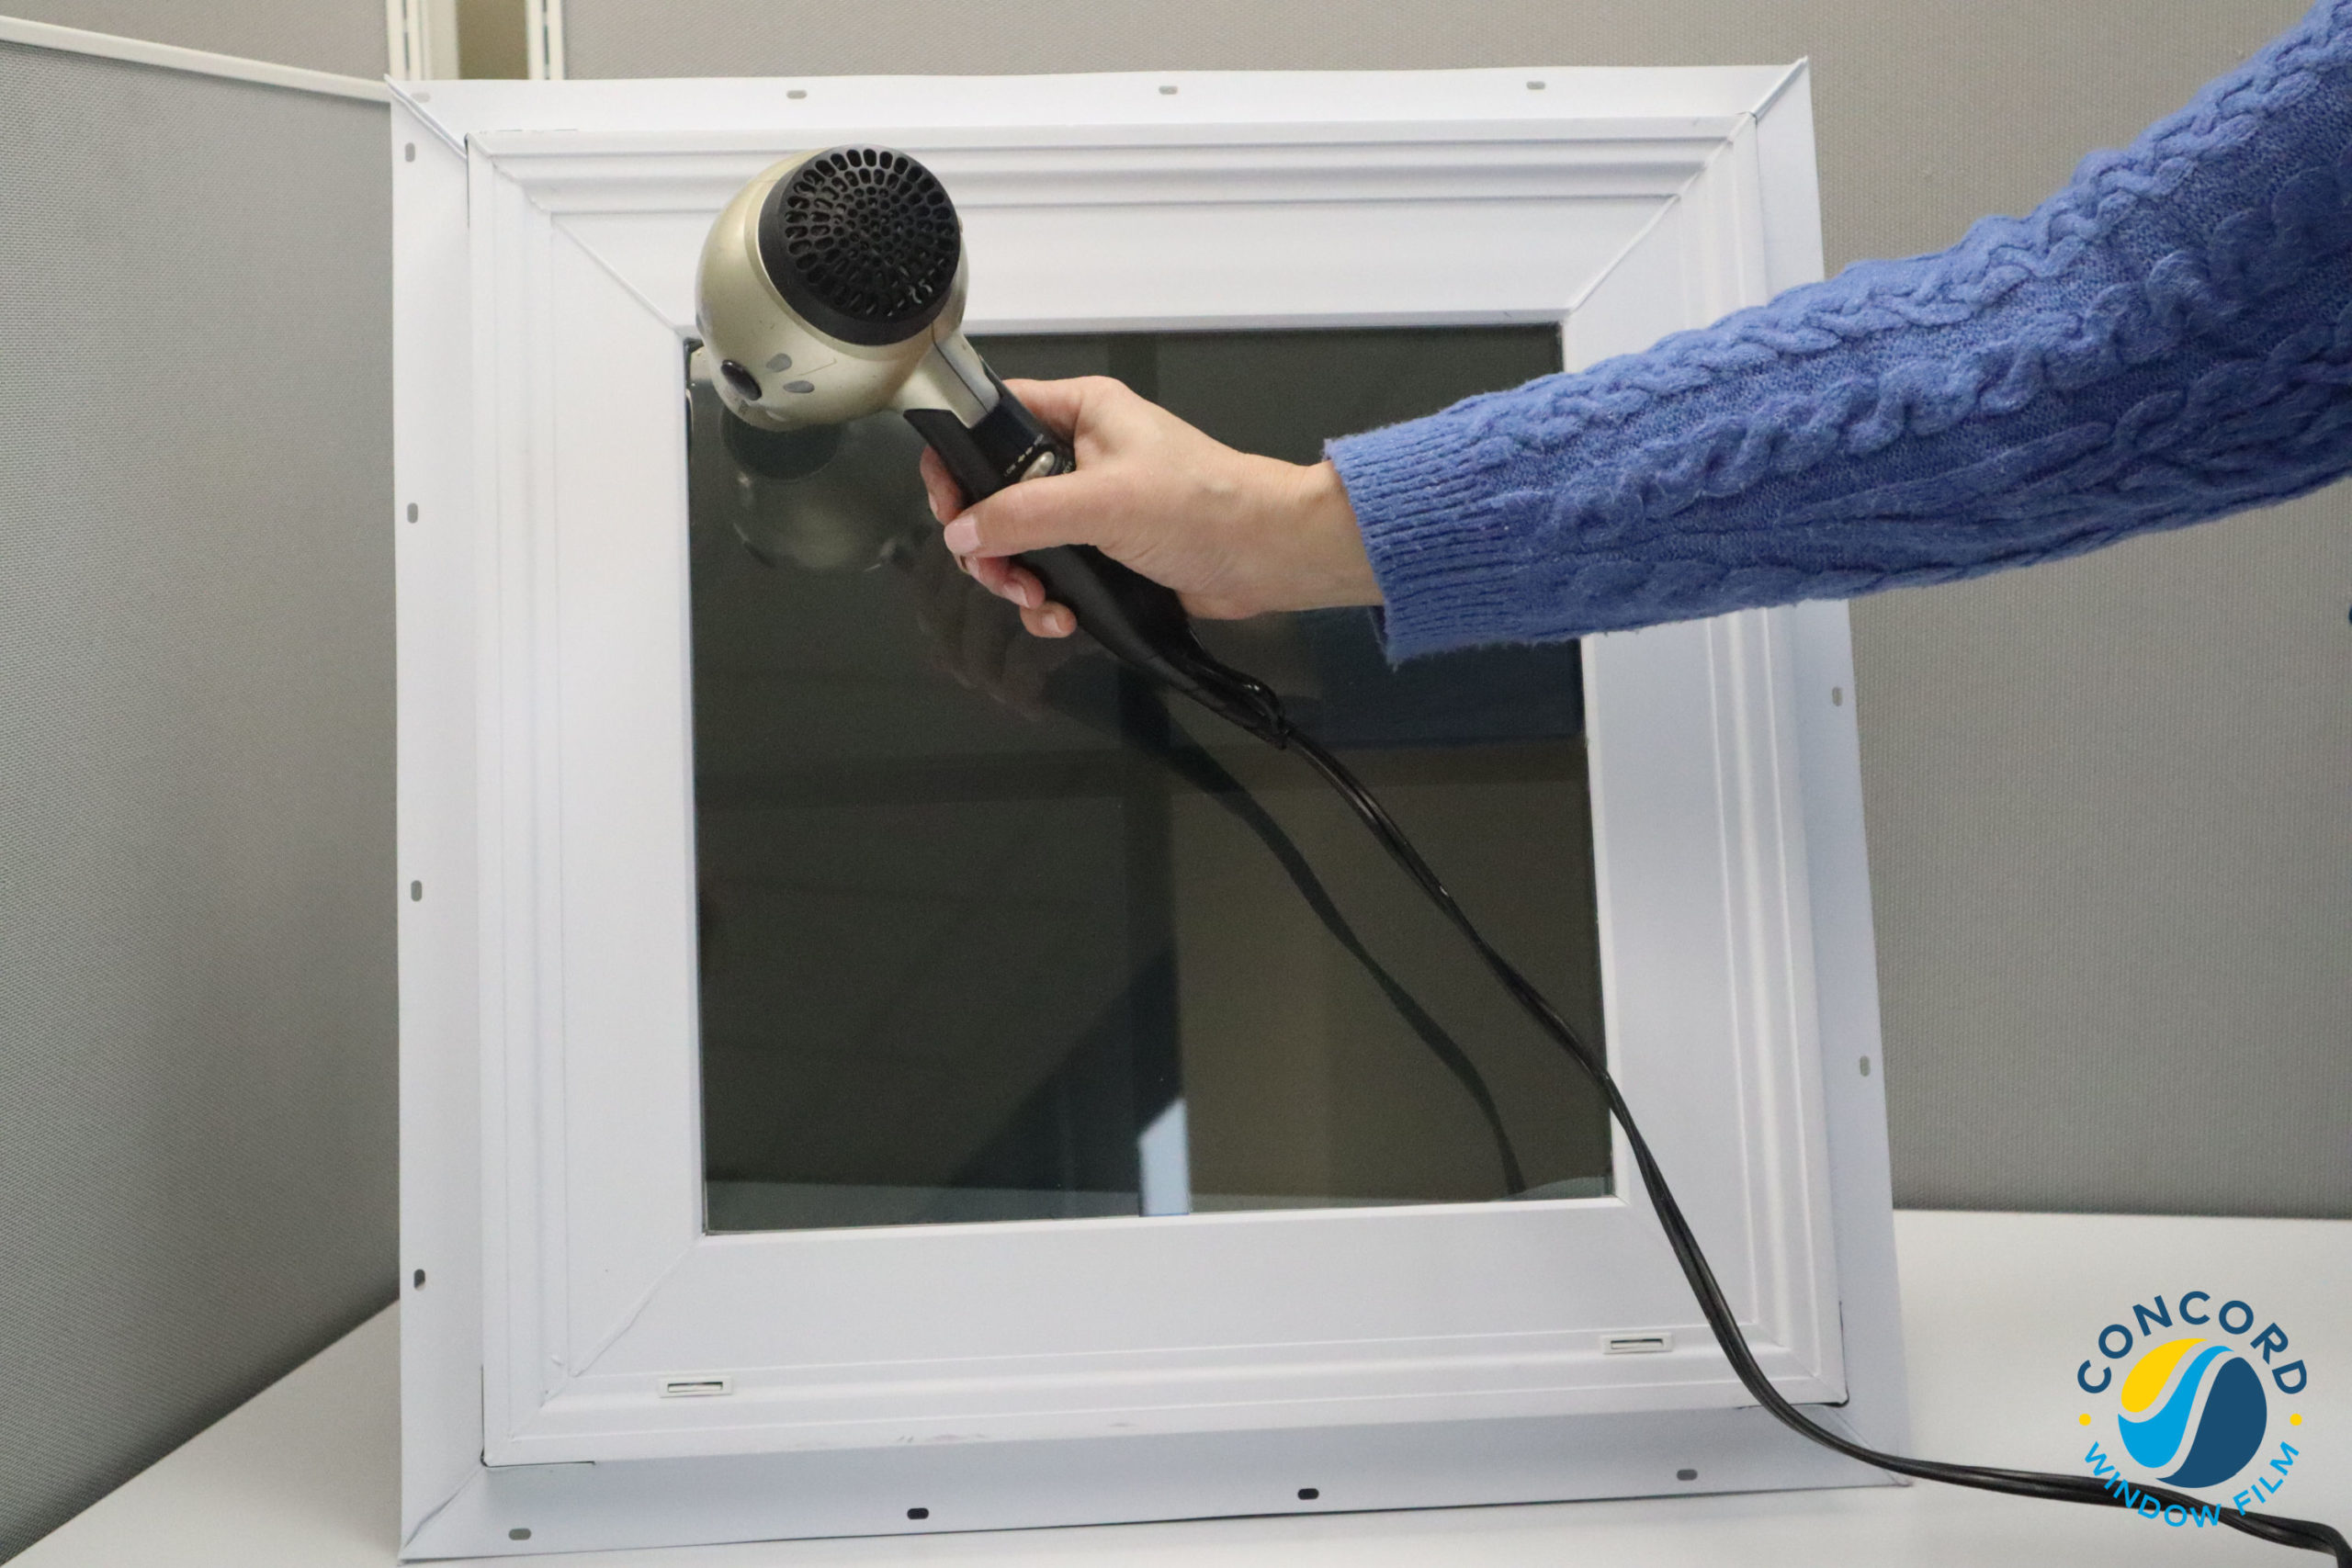 Using a hairdryer to loosen window film adhesive